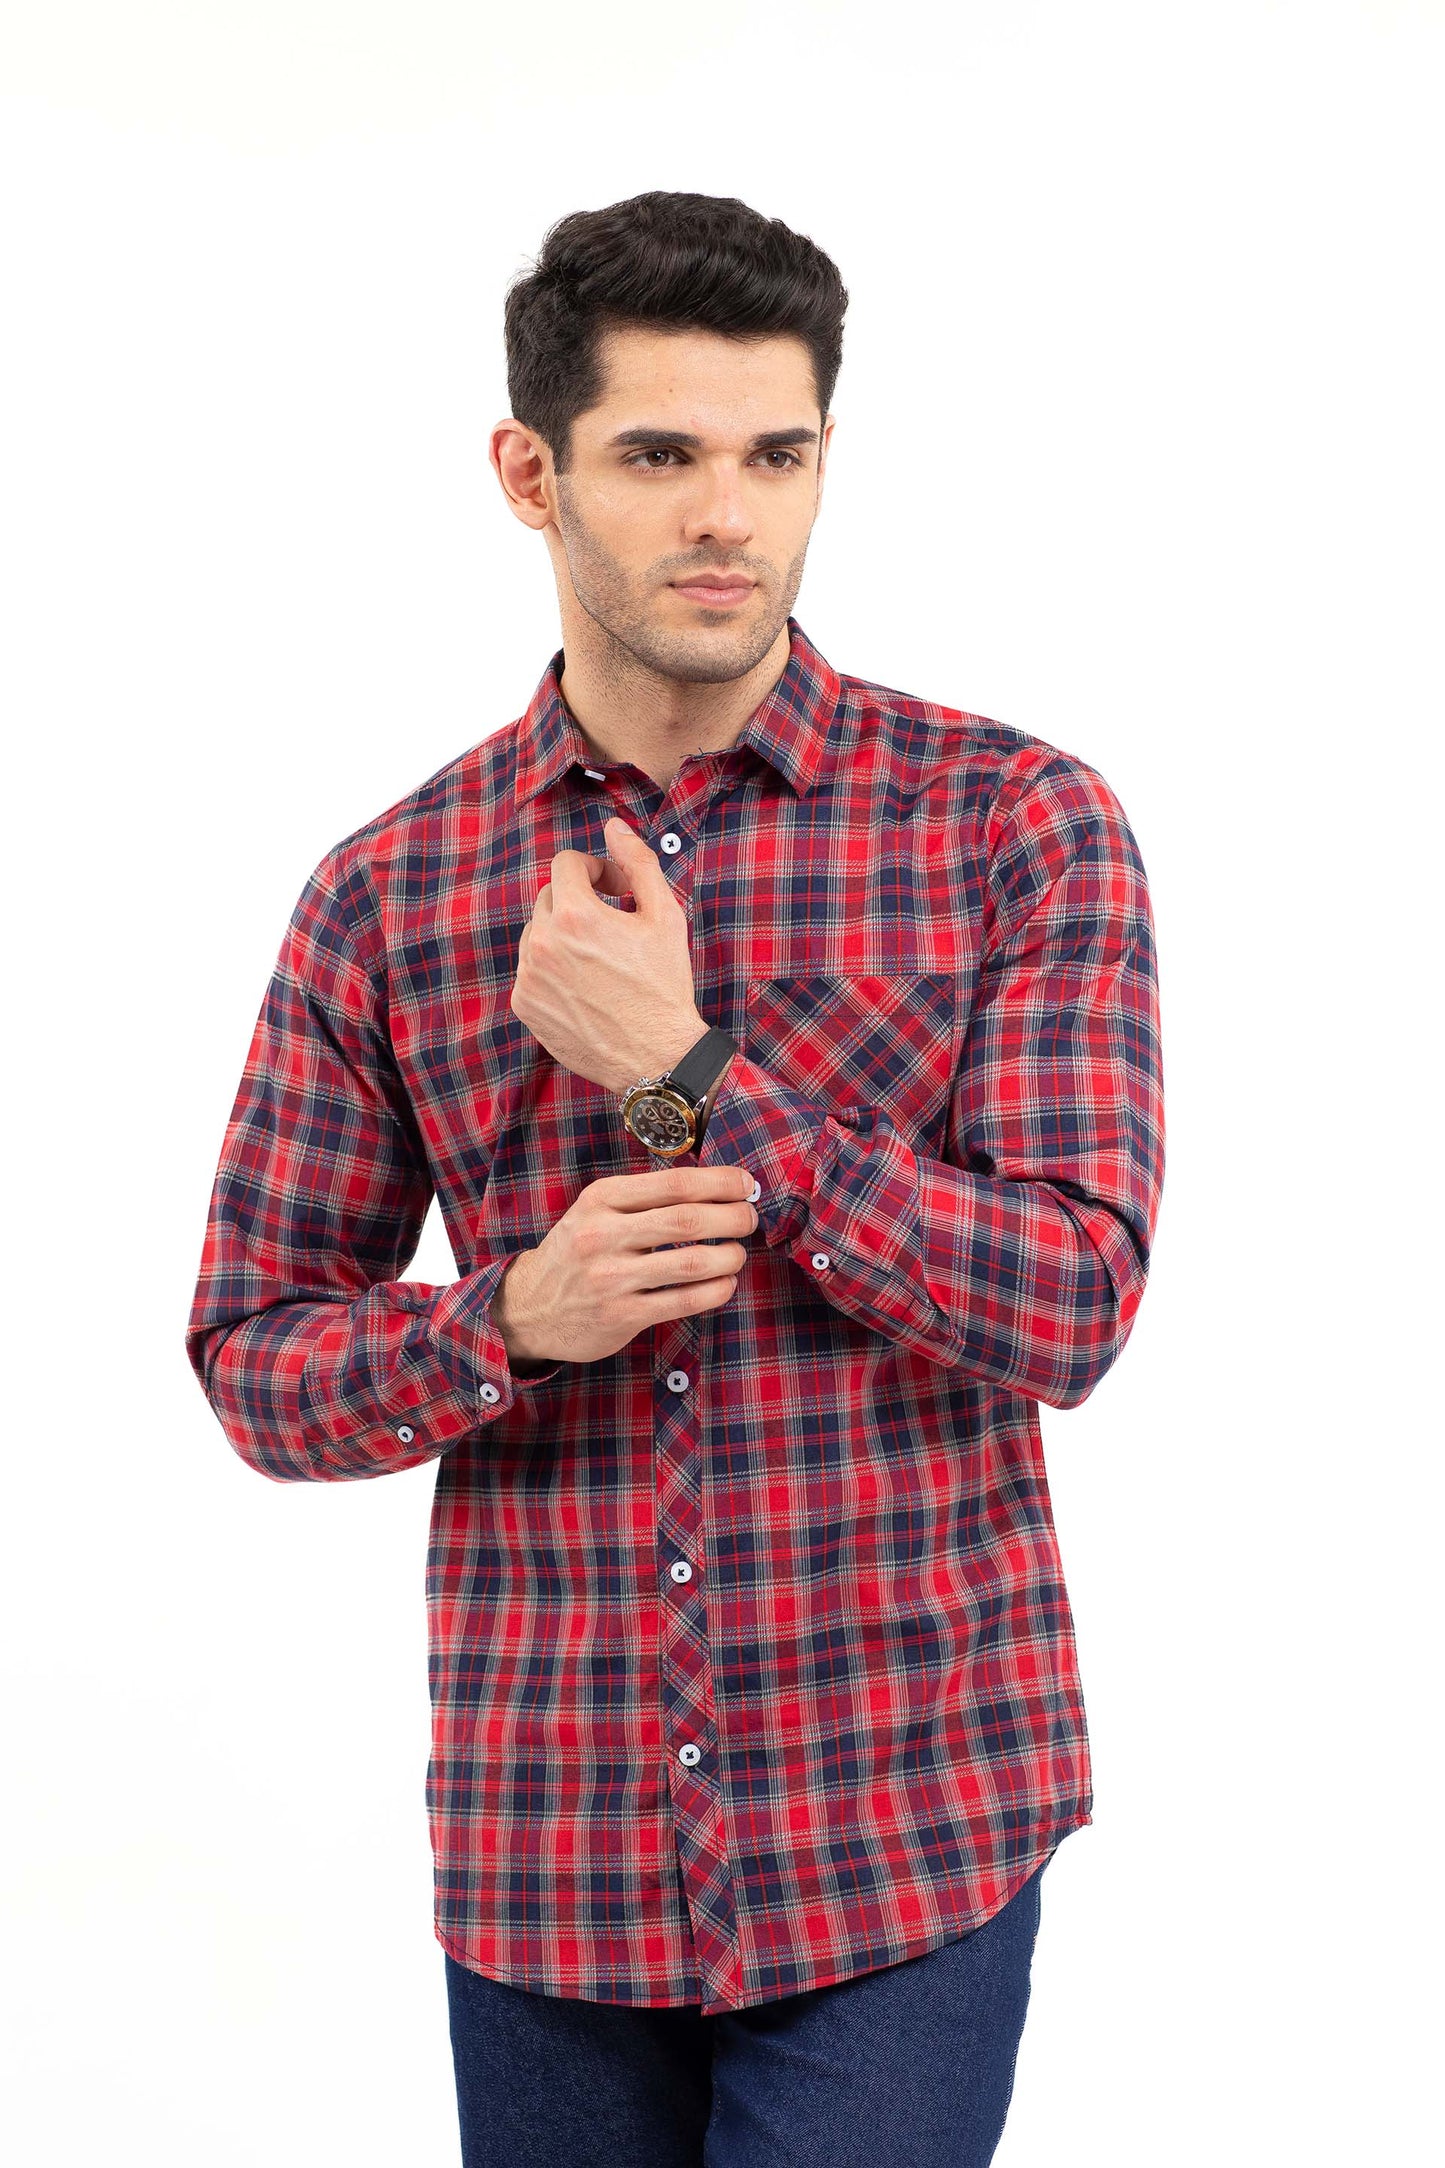 Check Shirt Navy/Red – ONE